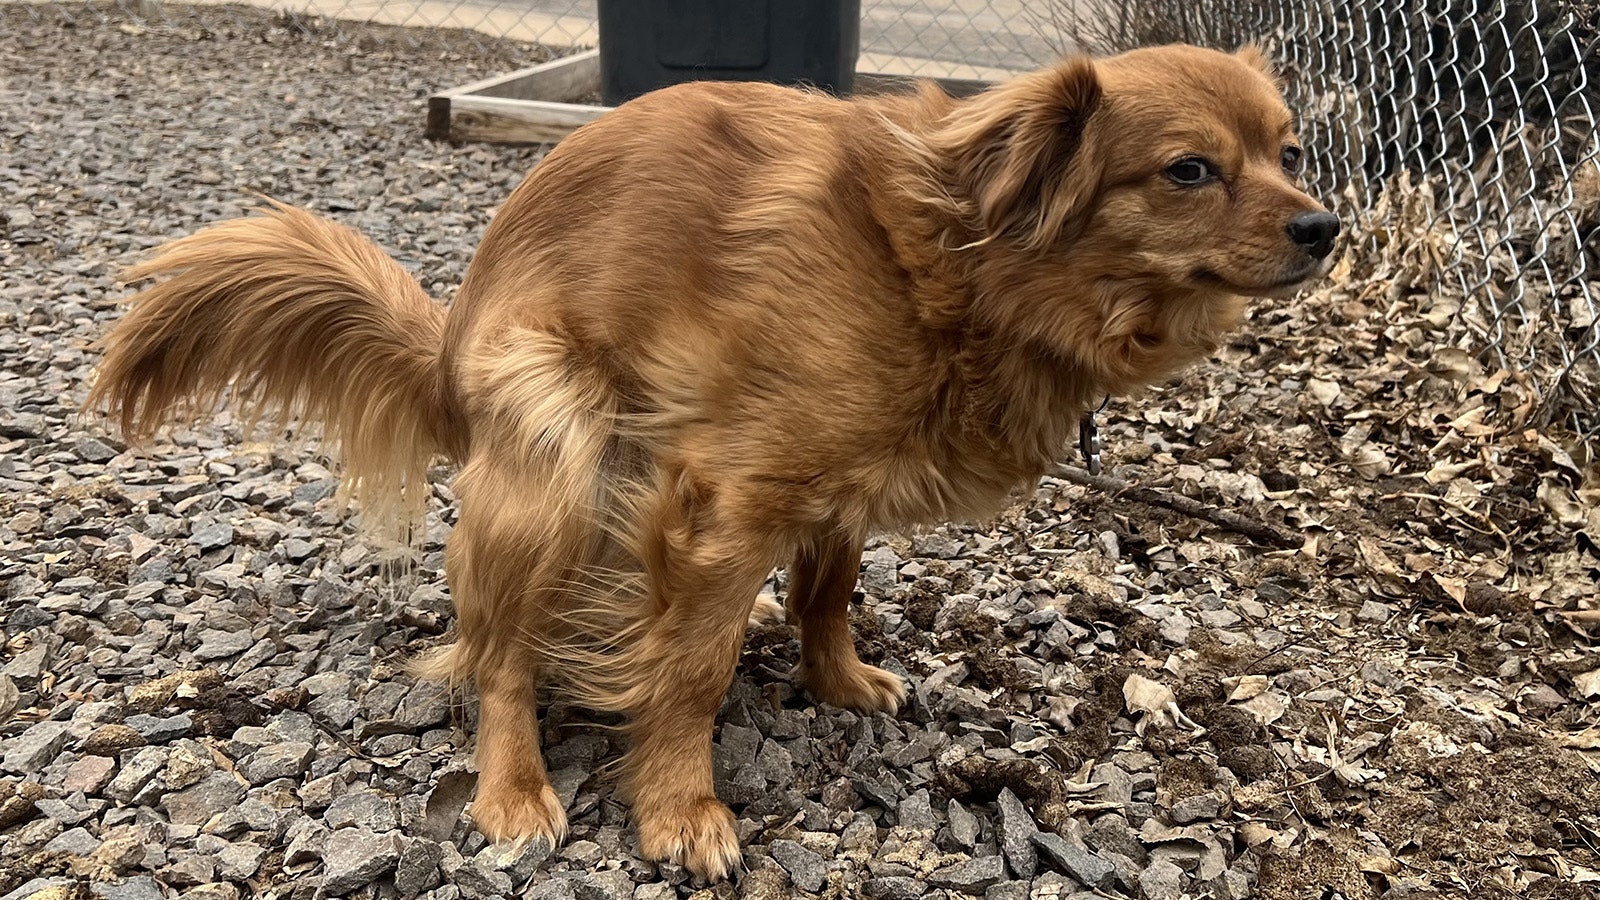 Roxy, a Pomeranian-Dachshund mix, adds to her owner’s springtime poop patrol duties.